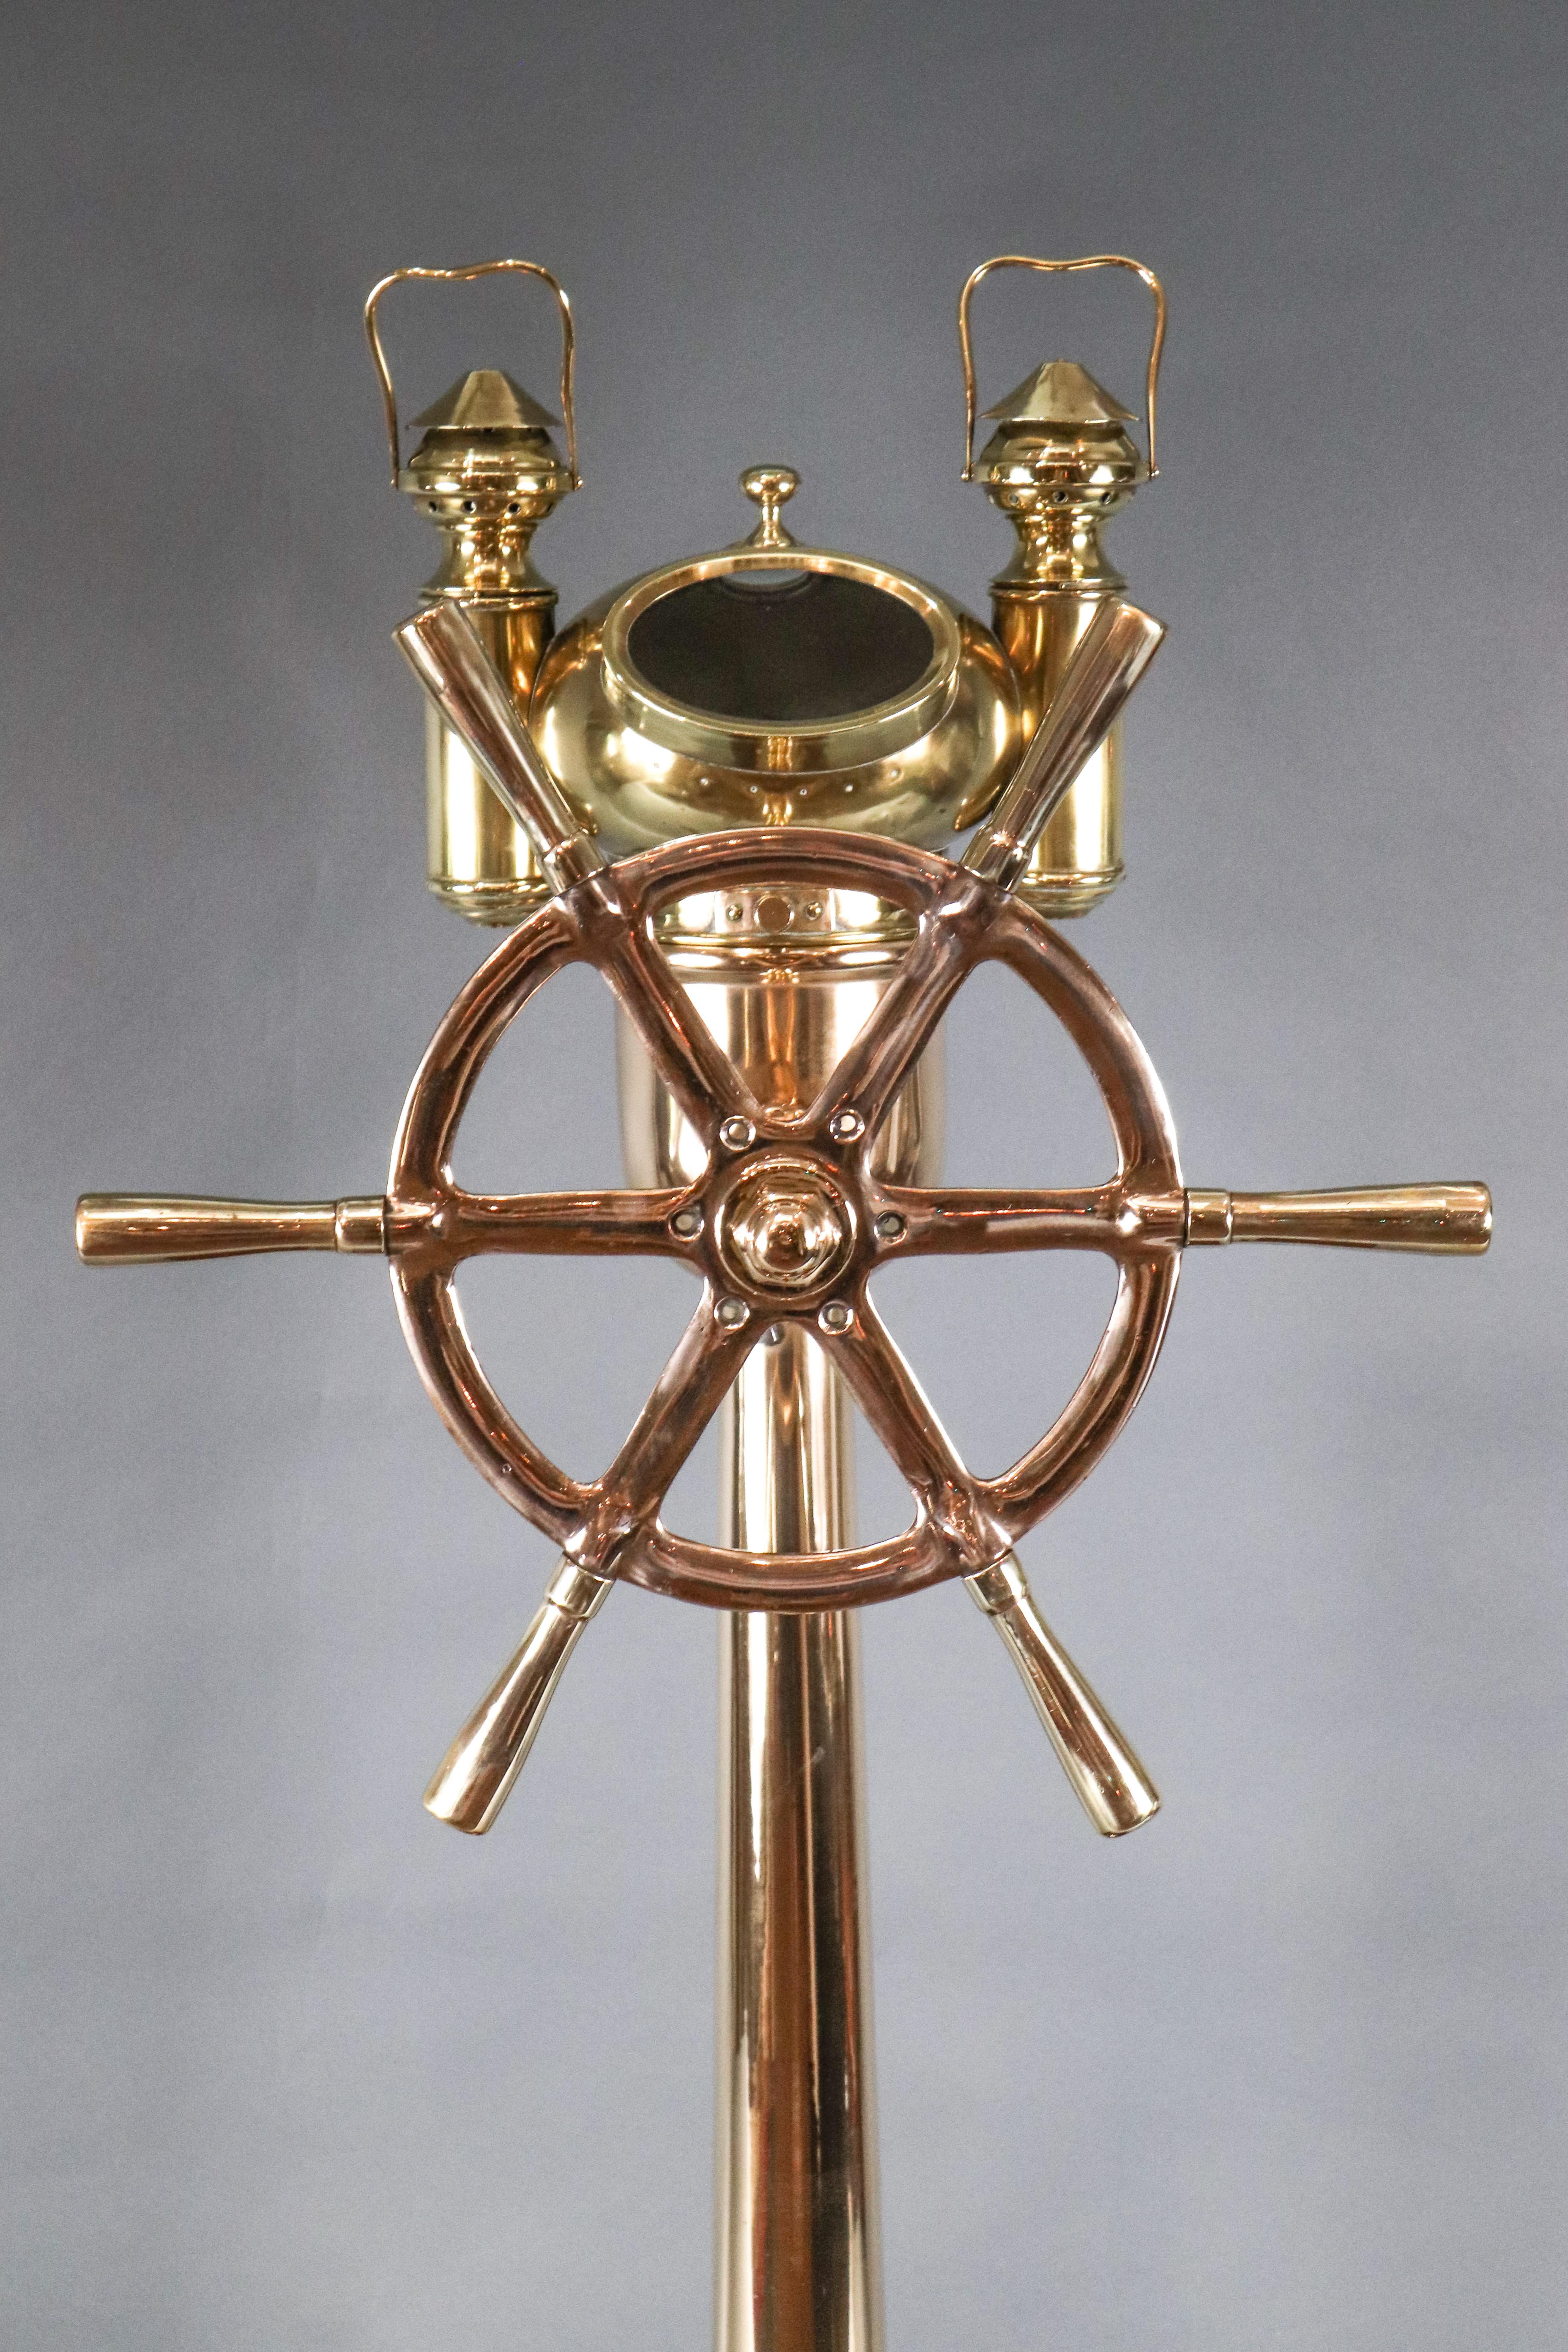 Exquisite brass binnacle with ship's wheel mounted on front.